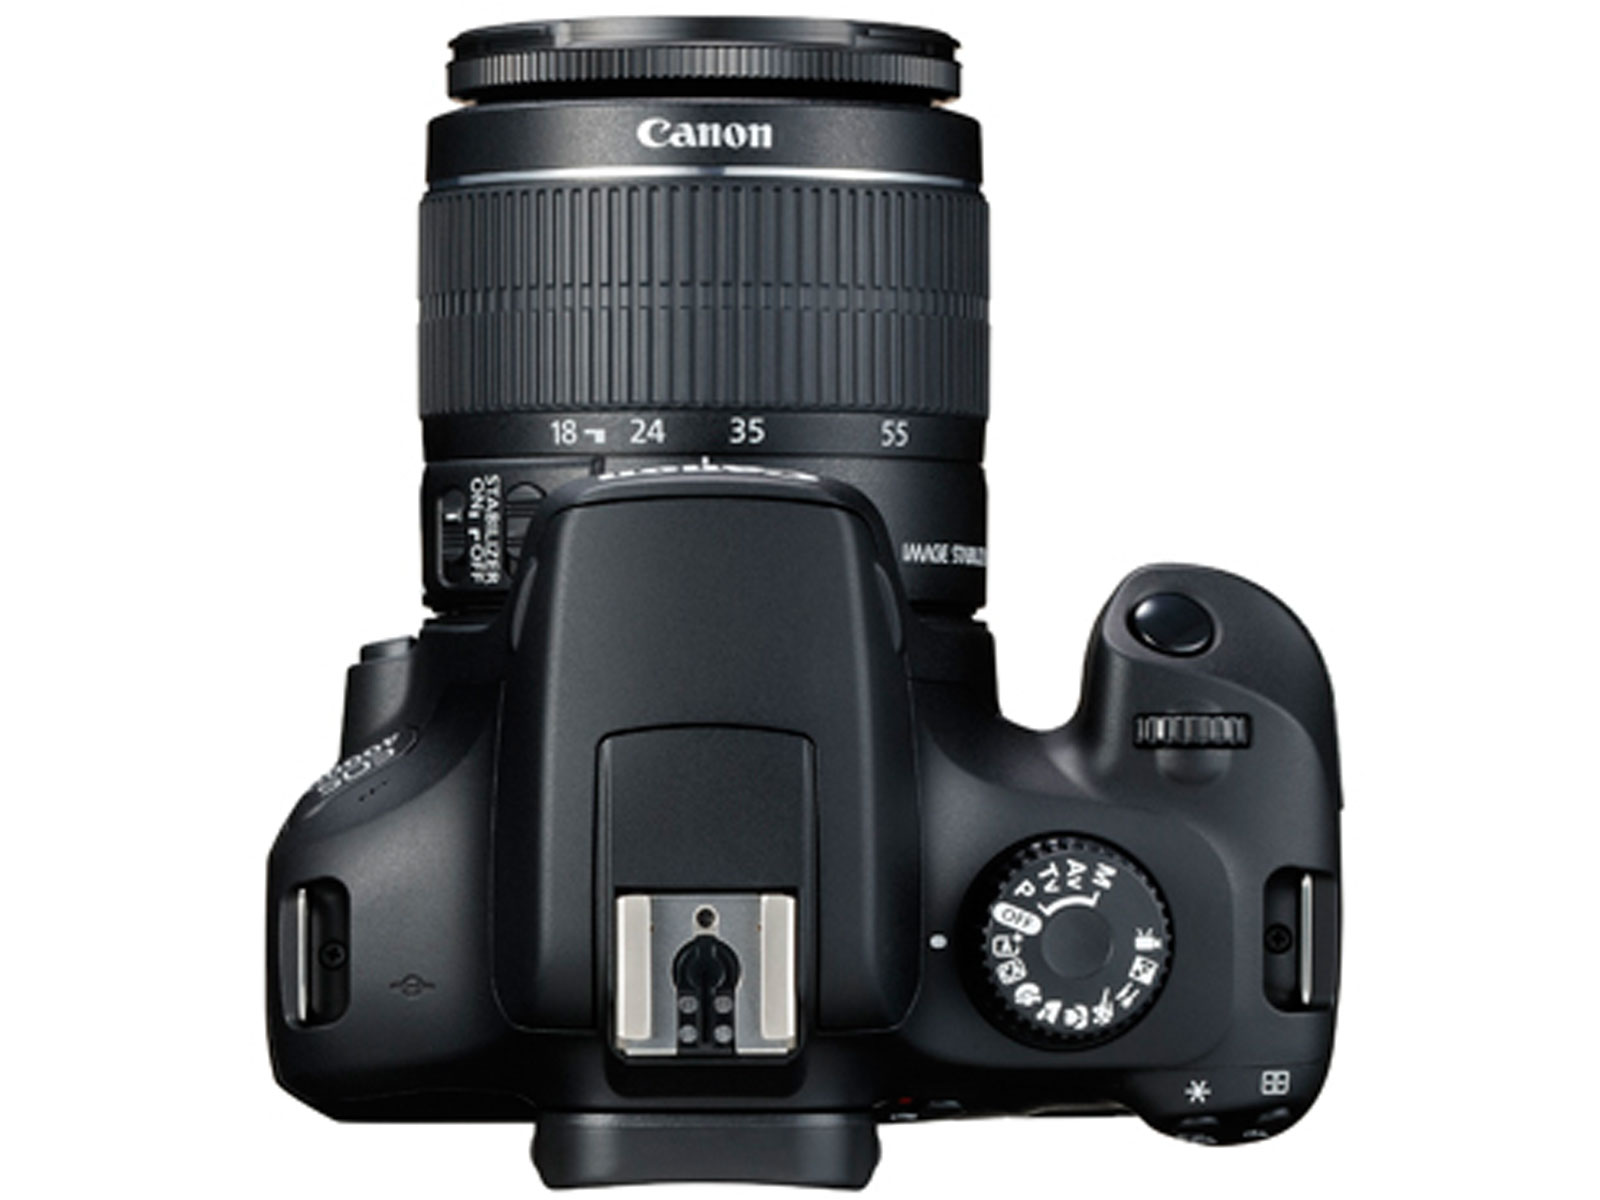 Canon EOS 4000D / Rebel T100 with EF-S 18-55mm f/3.5-5.6 III Lens ...